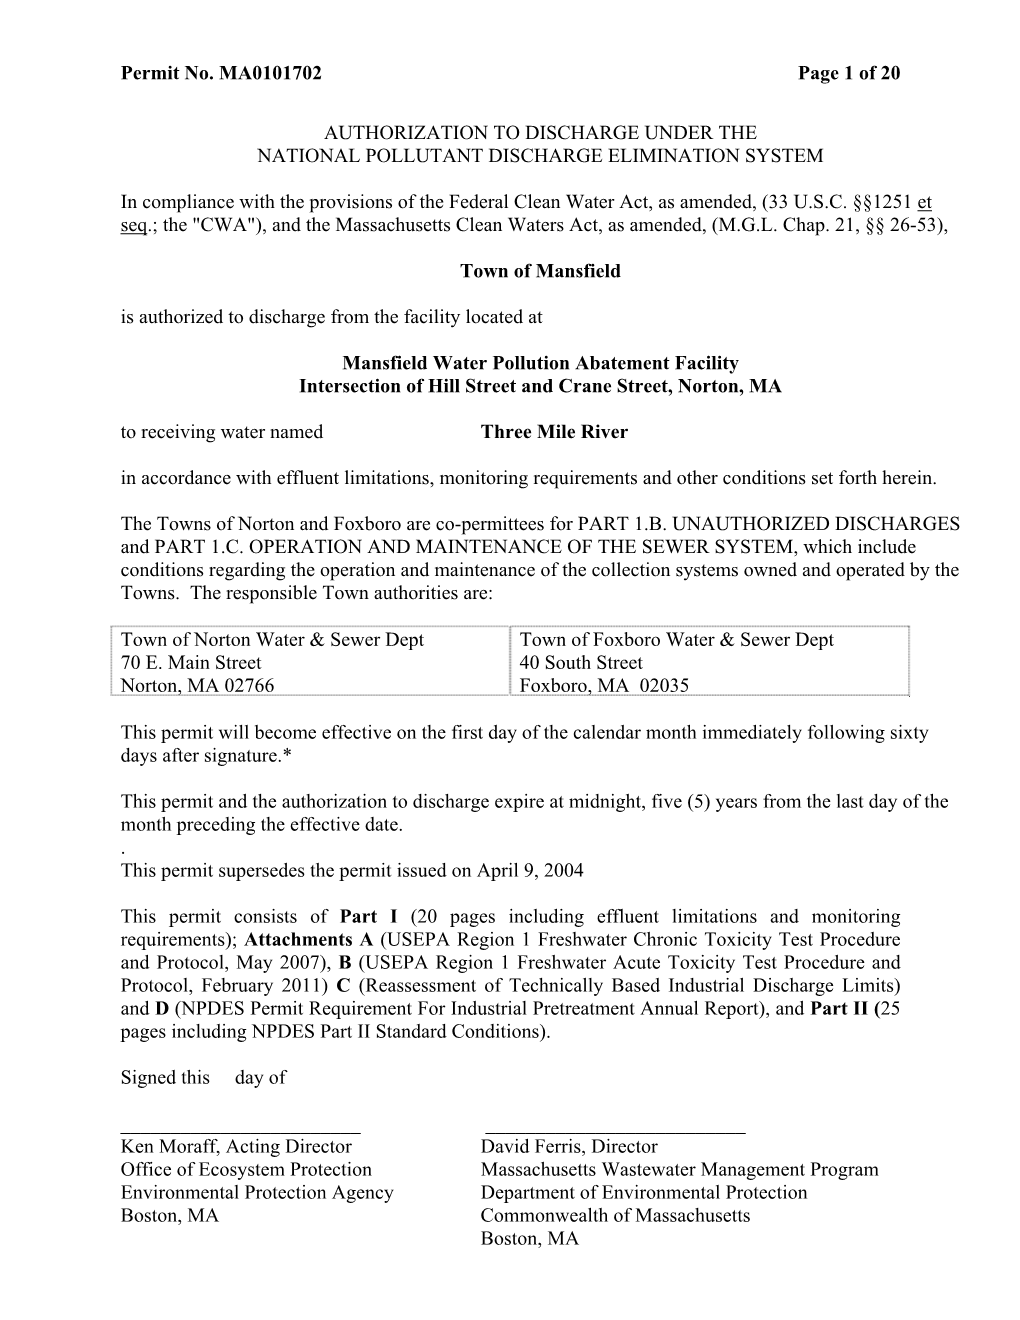 Town of Mansfield, Draft Permit, MA0101702